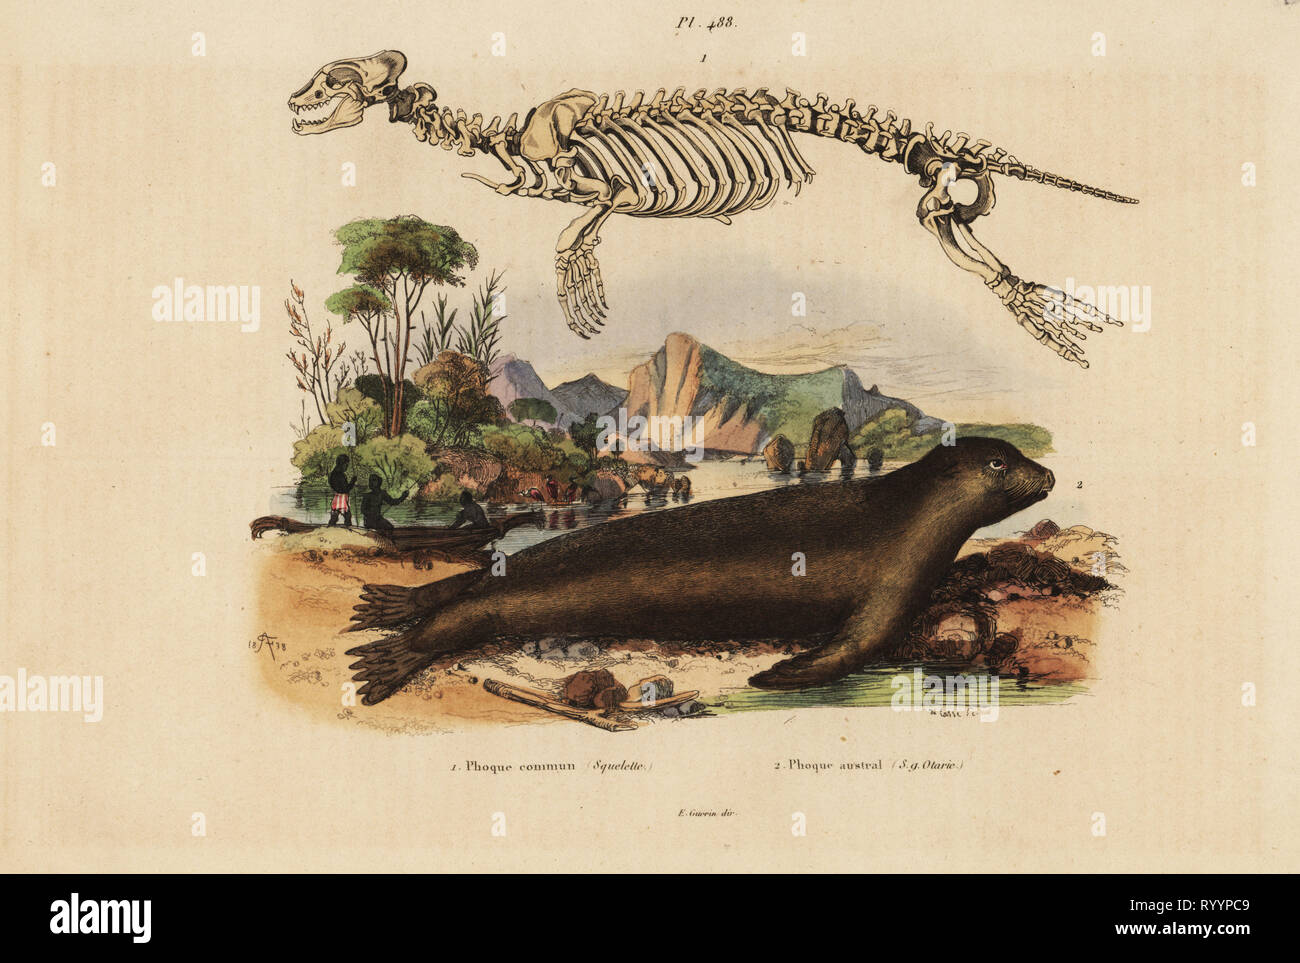 Skeleton of the common seal, Phoca vitulina 1, and Australian sea lion, Neophoca cinerea 2. Phoque commun squelette, Phoque austral (s.g. Otarie). Handcoloured steel engraving by du Casse after an illustration by Adolph Fries from Felix-Edouard Guerin-Meneville's Dictionnaire Pittoresque d'Histoire Naturelle (Picturesque Dictionary of Natural History), Paris, 1834-39. Stock Photo